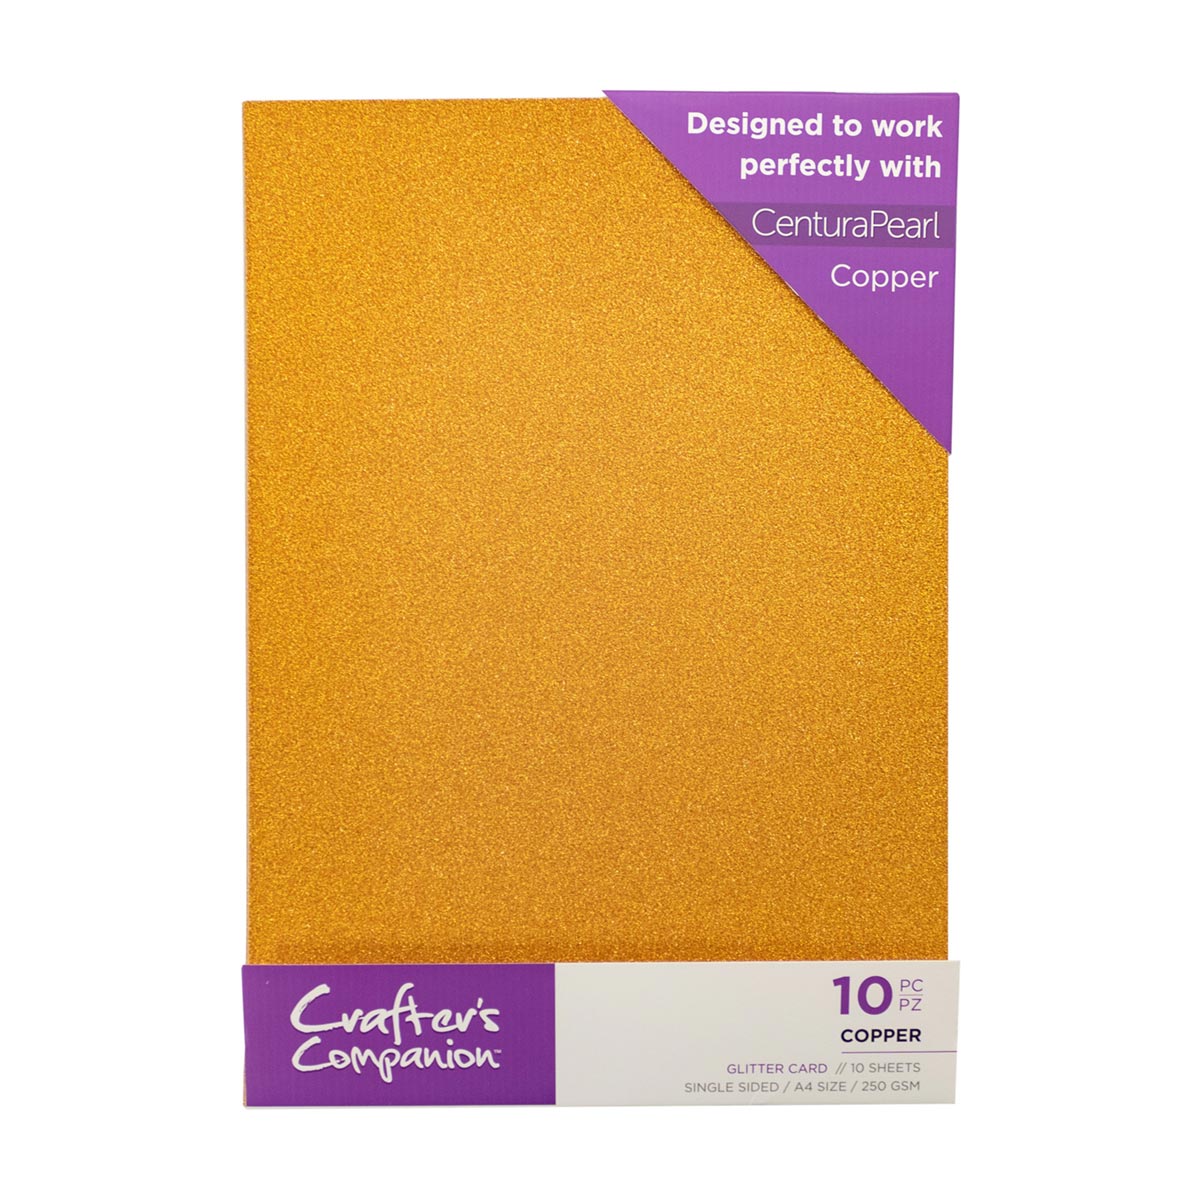 Crafter's Companion - A4 Glitter Card - 250gsm 10 Sheets - Copper